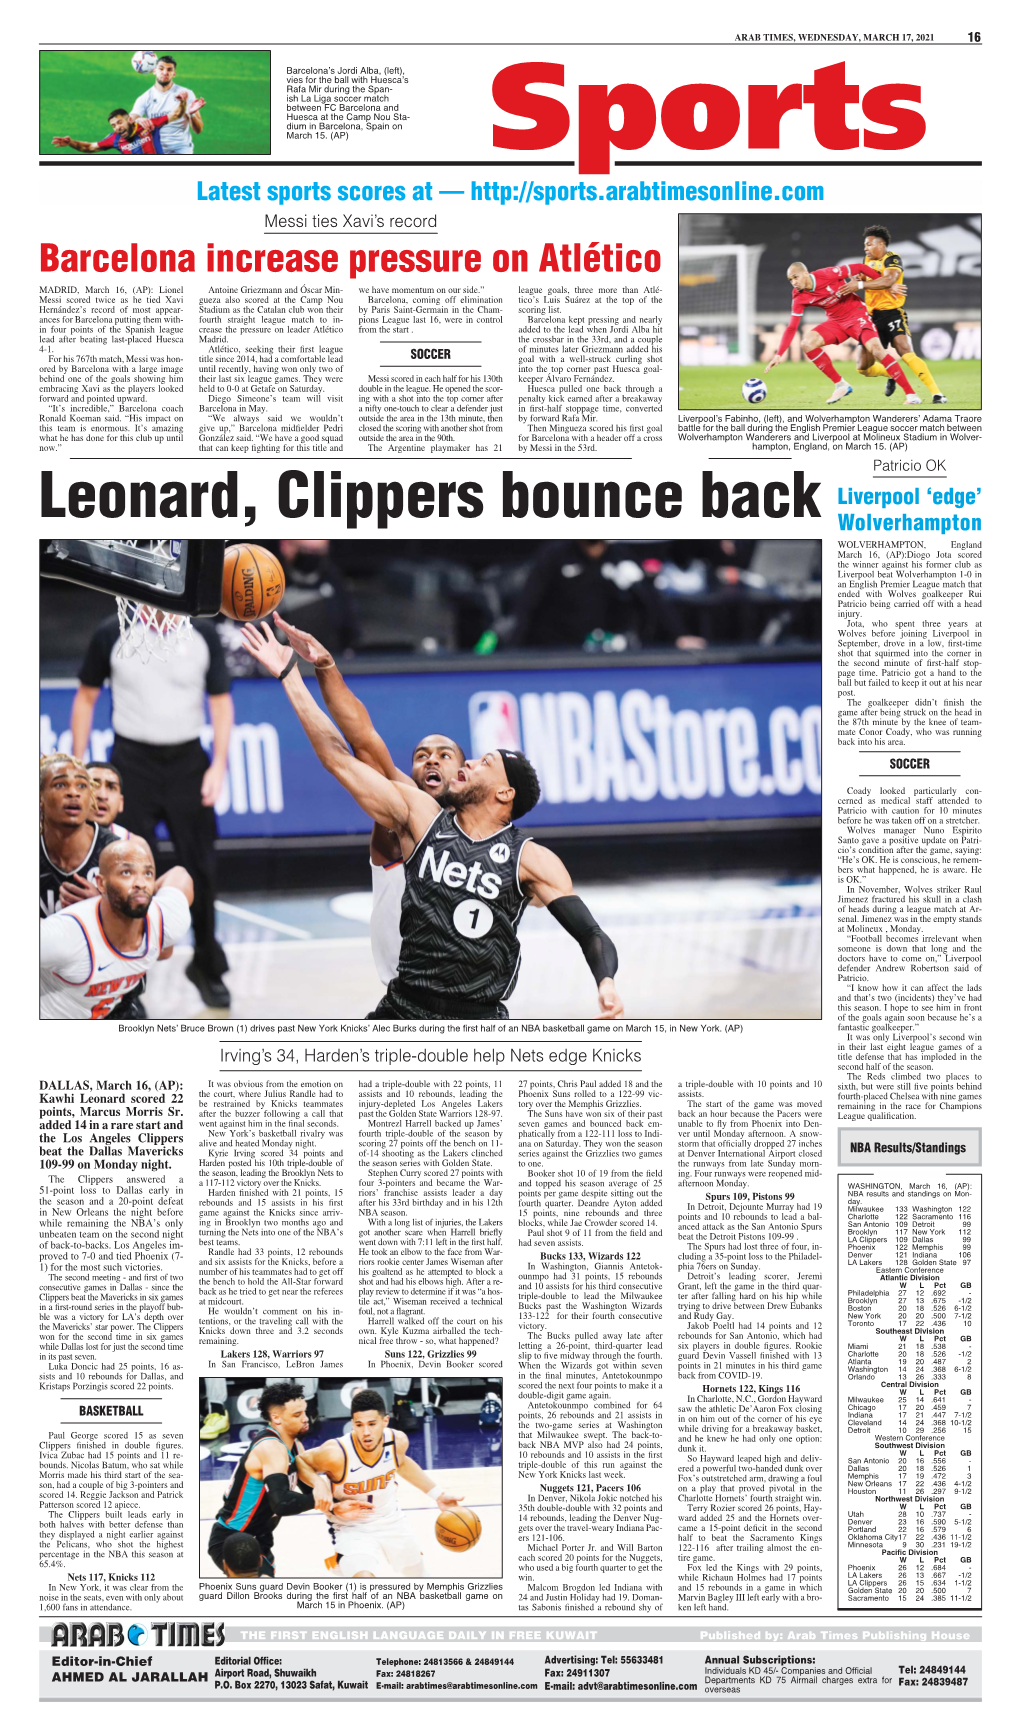 Leonard, Clippers Bounce Back